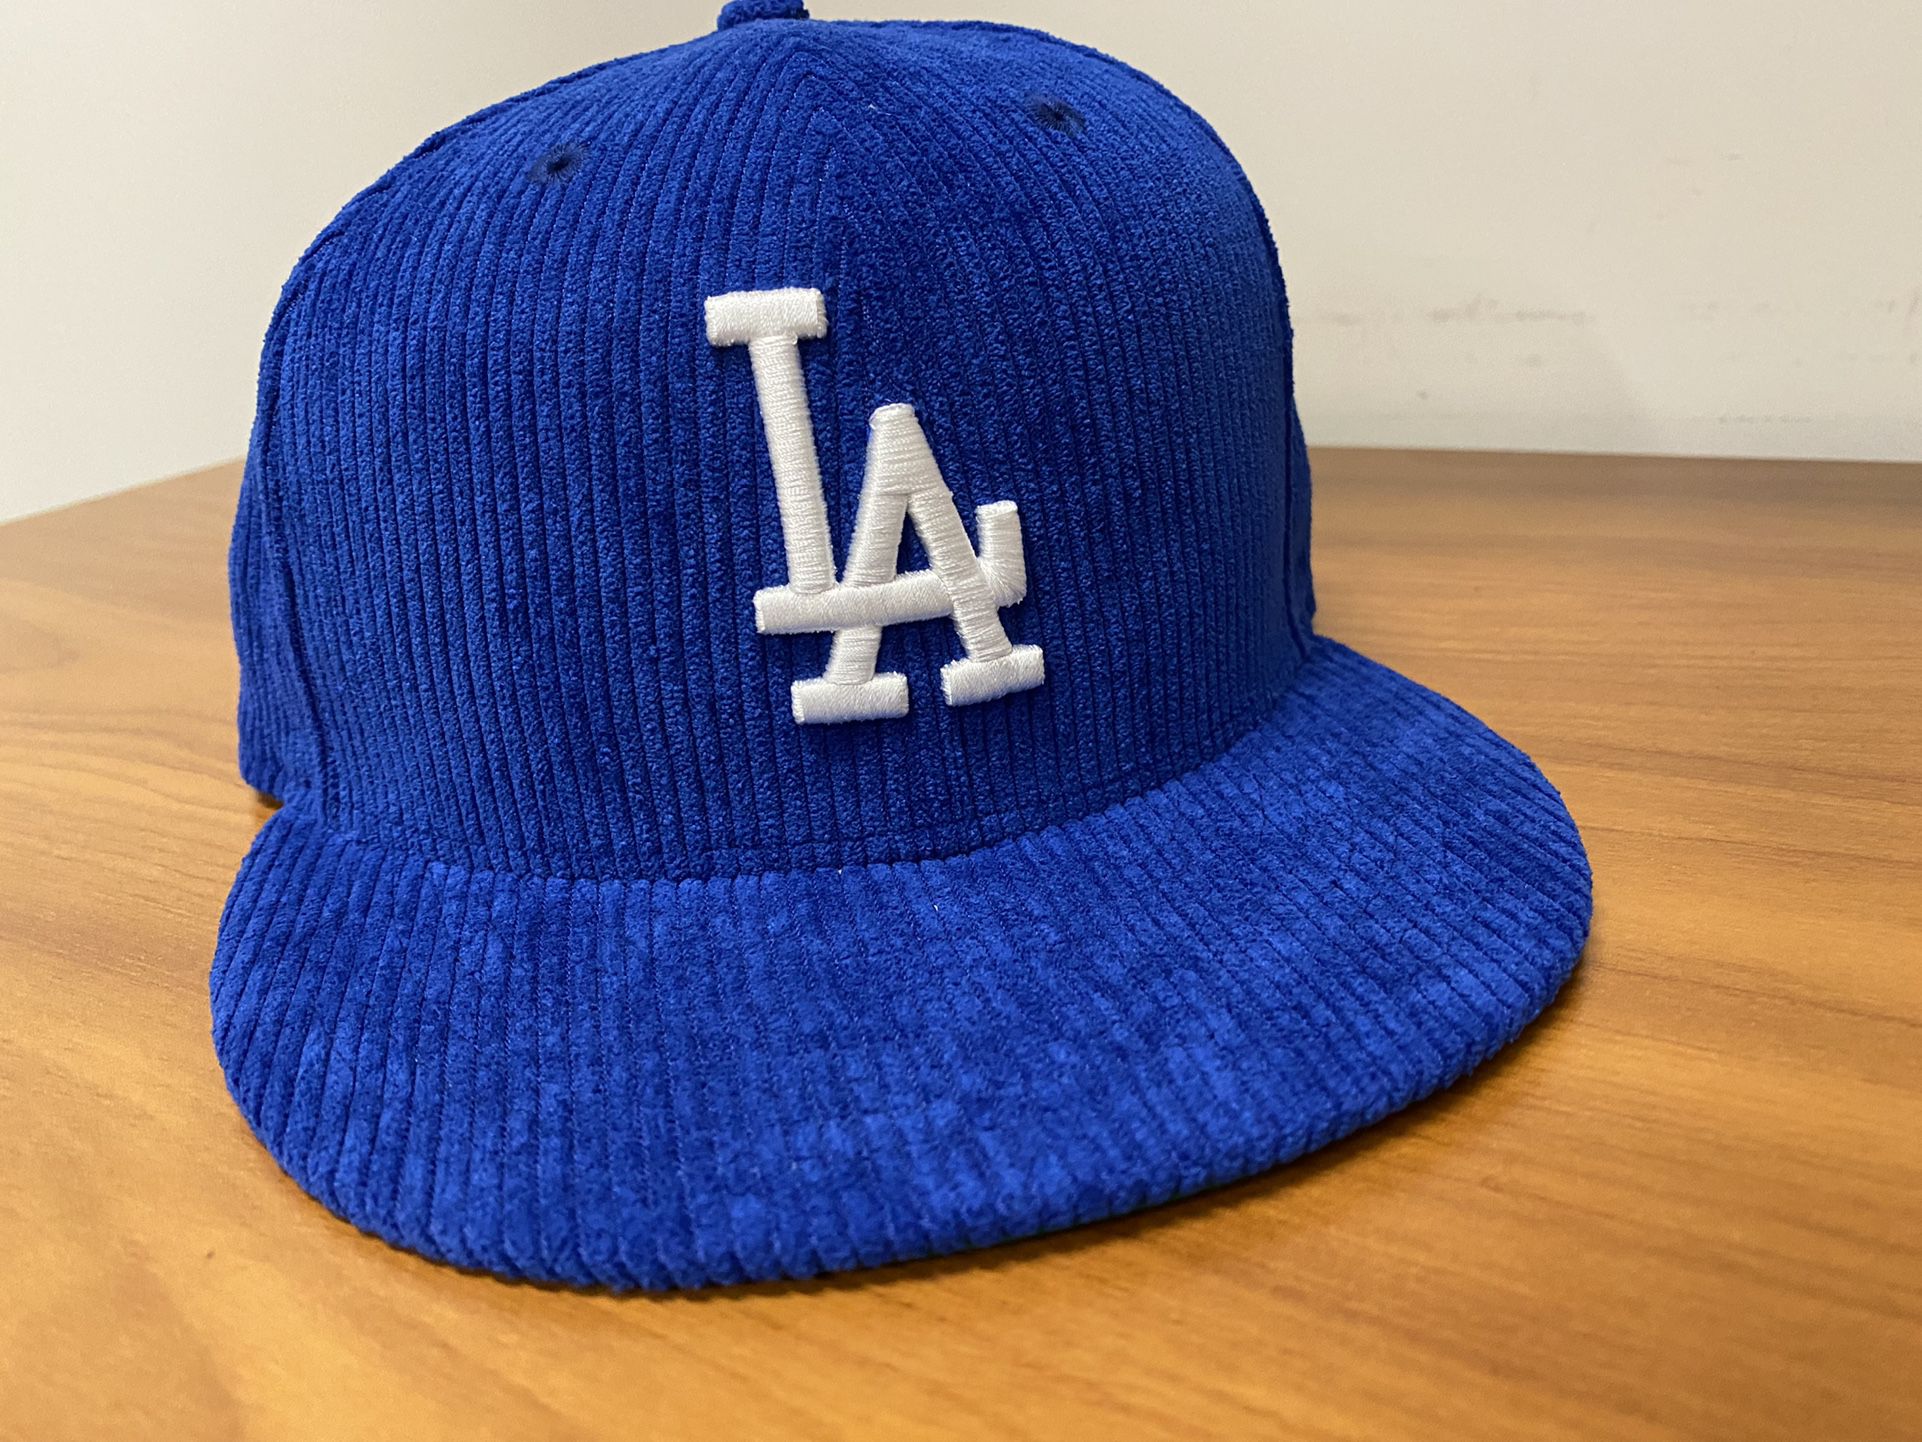 LA Dodgers Proper Corduroy Fitted Hat for Sale in Downey, CA